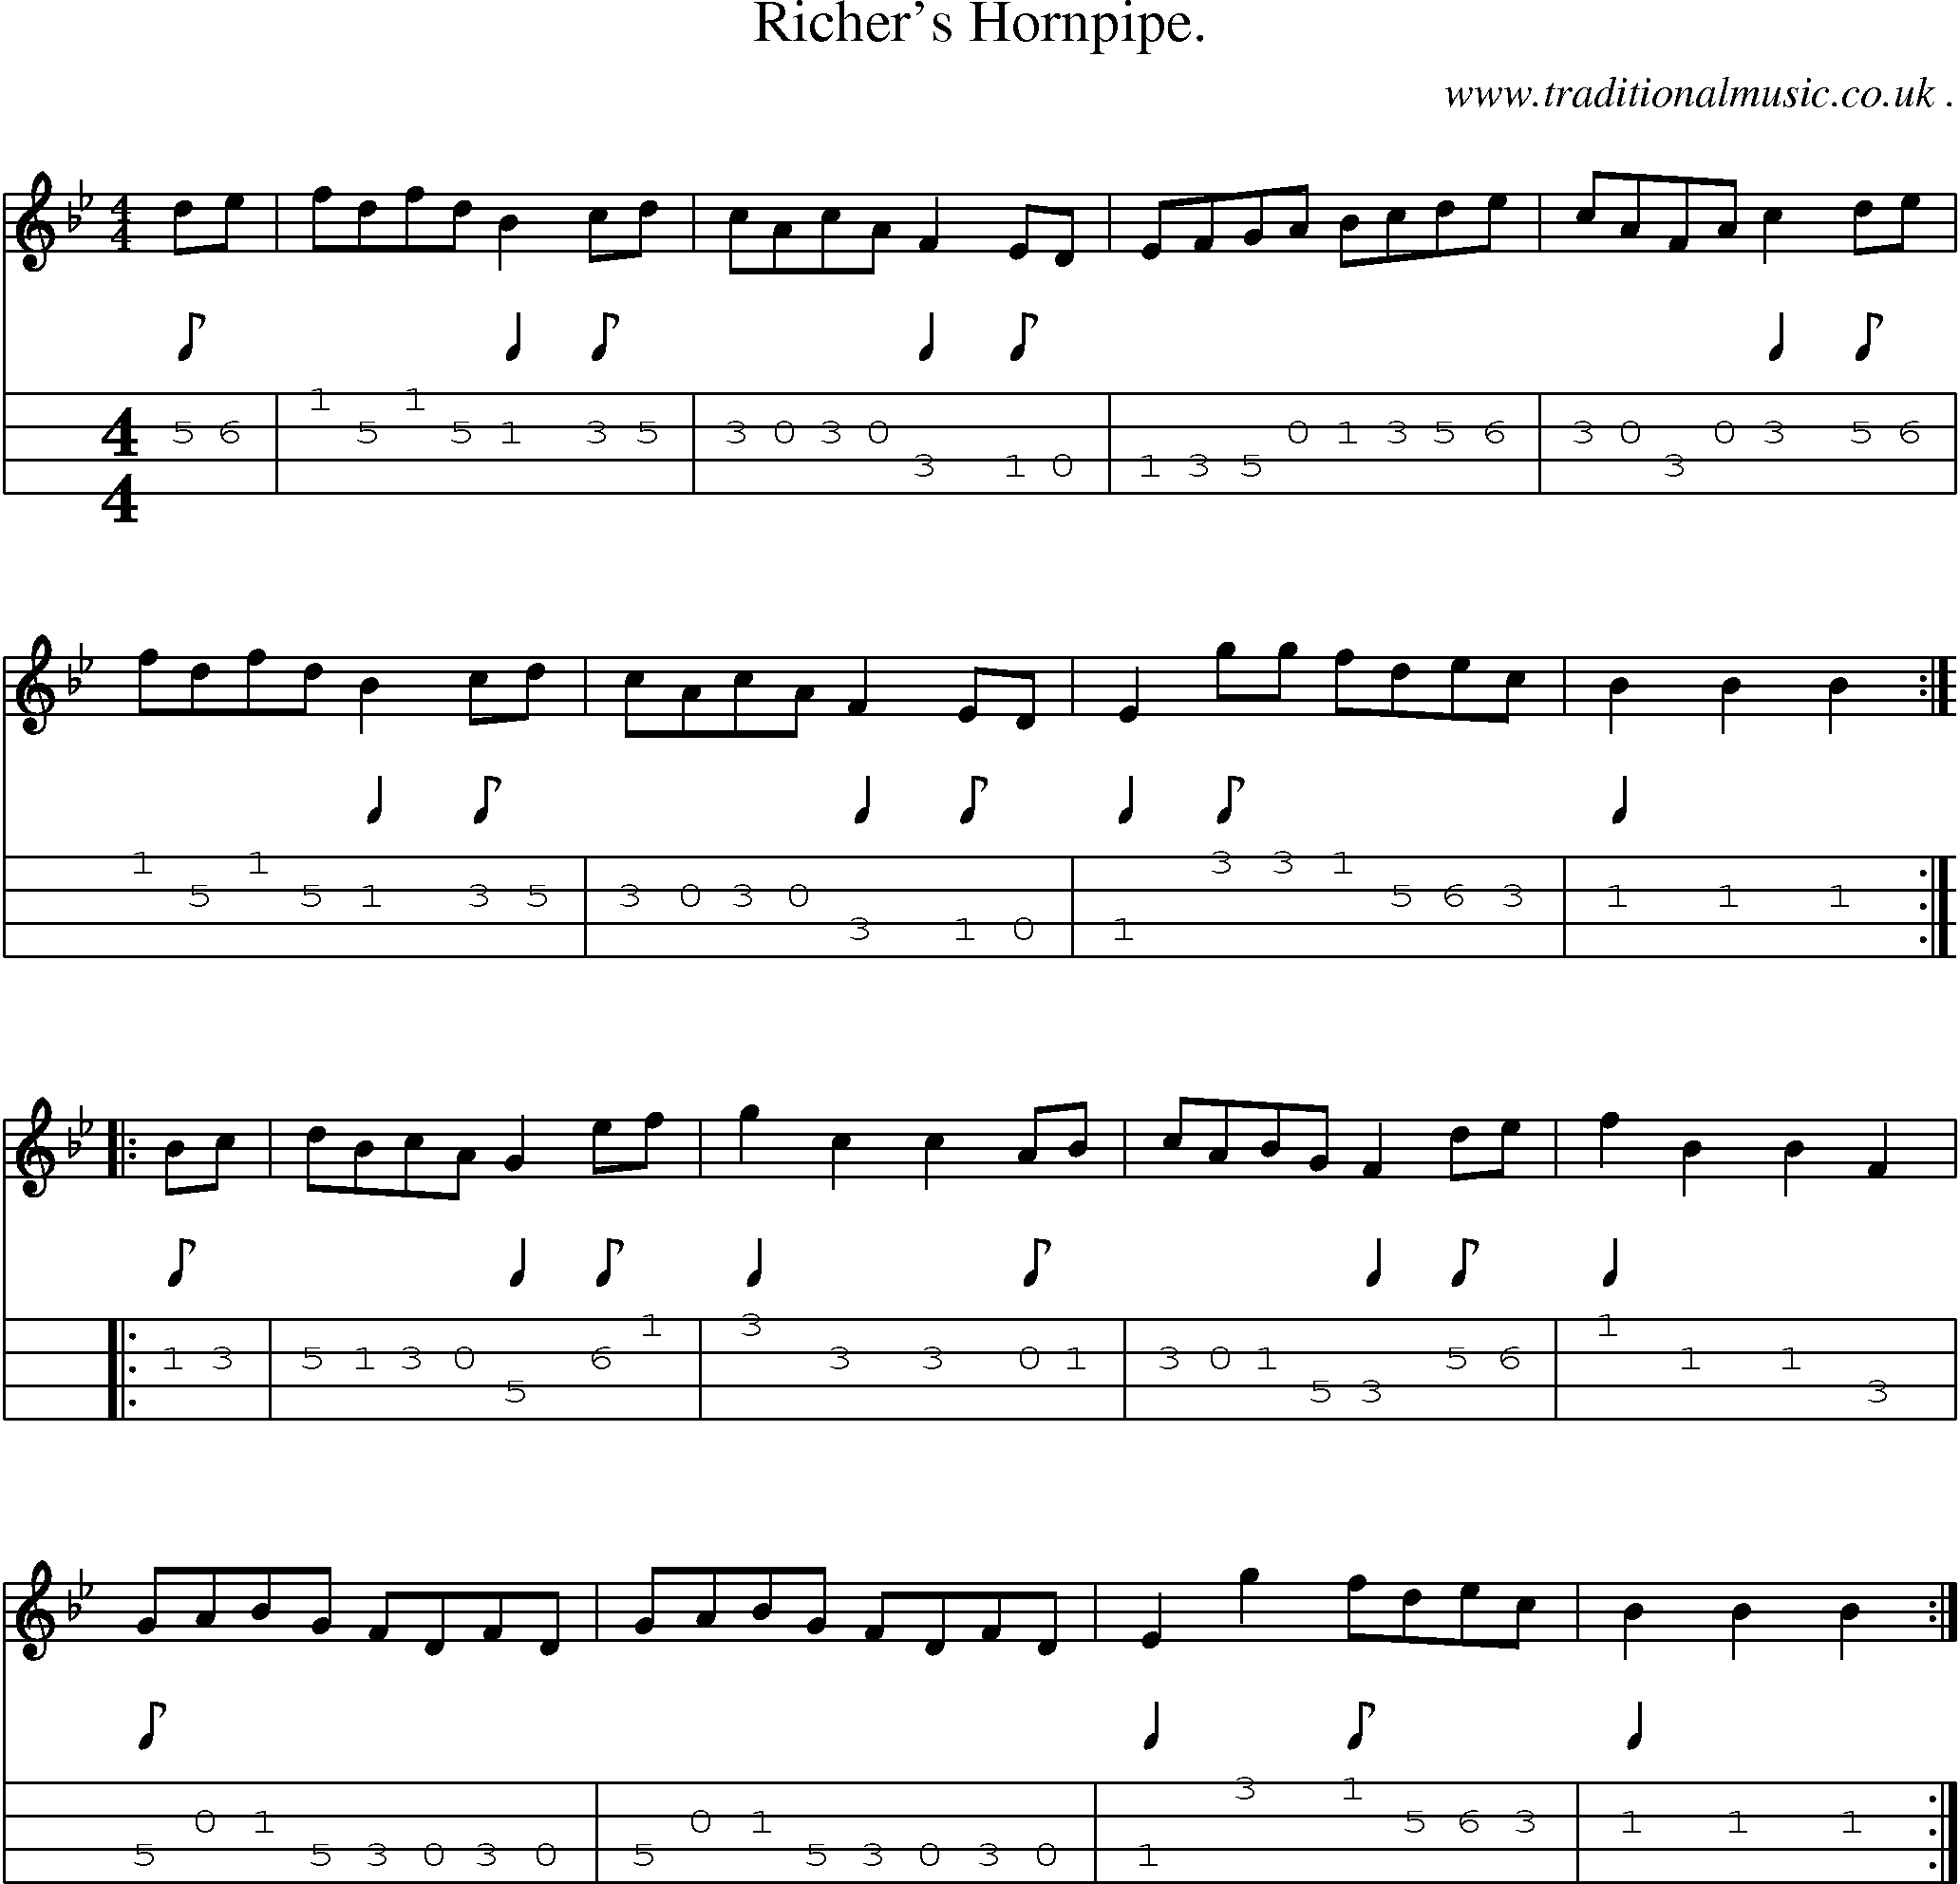 Sheet-Music and Mandolin Tabs for Richers Hornpipe 